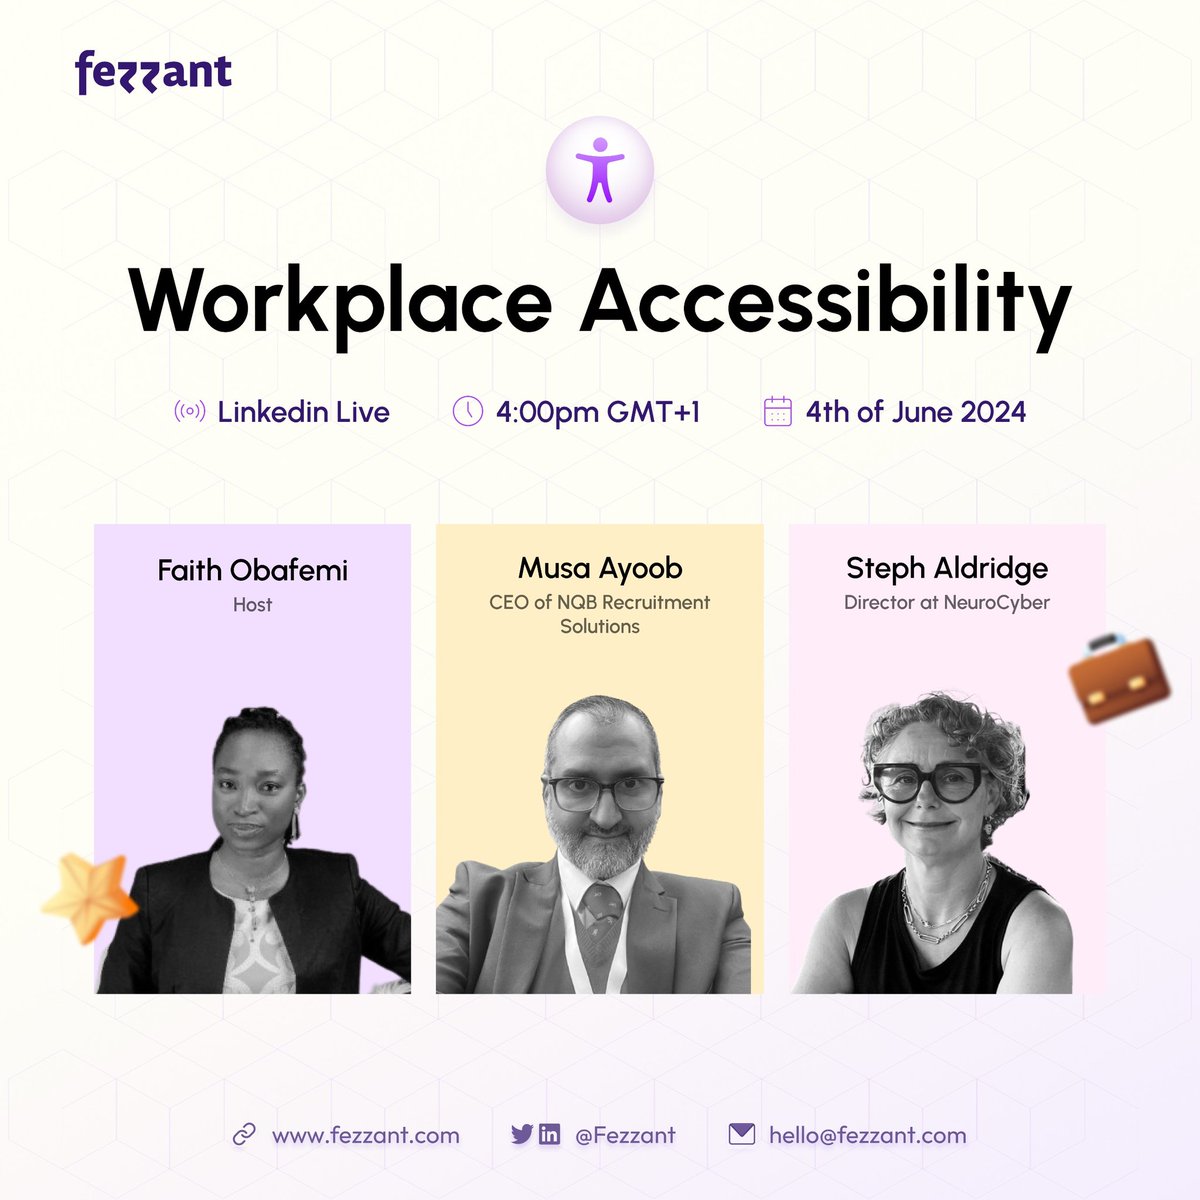 Steph Aldridge, Director at @NeuroCyberUK, and Musa Ayoob, CEO of @NQBRecruit Solutions, would be discussing workplace accessibility. 

Join the conversation by registering: lu.ma/ew2vvj5y

#accessibility #a11y #inclusion #diversity